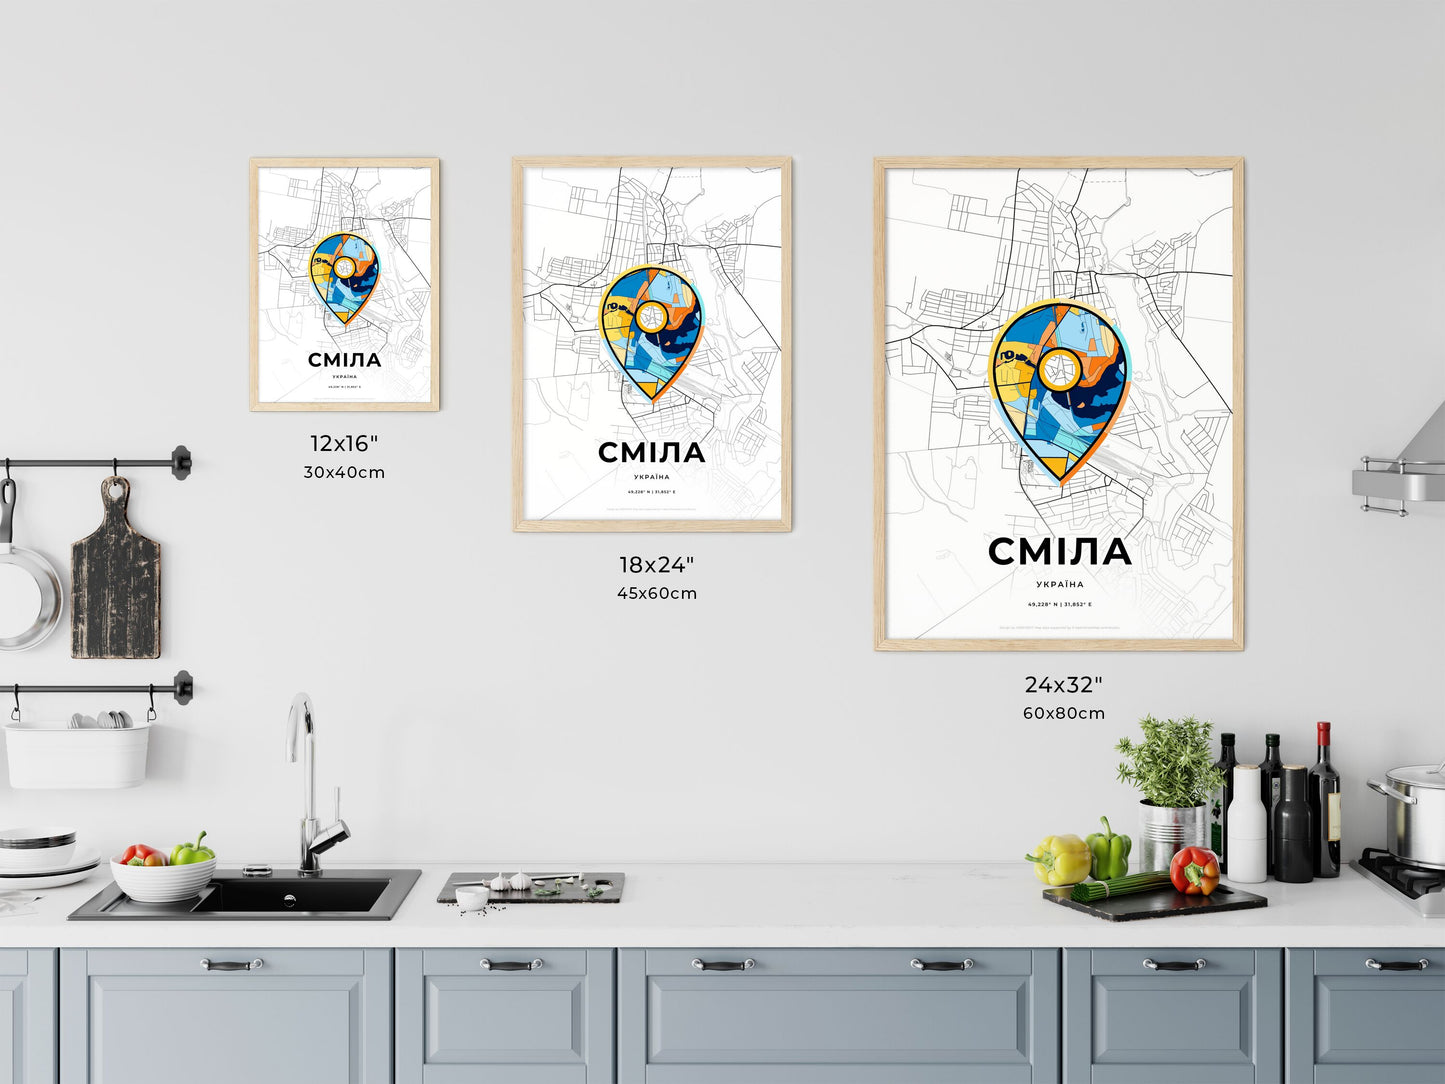 SMILA UKRAINE minimal art map with a colorful icon. Where it all began, Couple map gift.